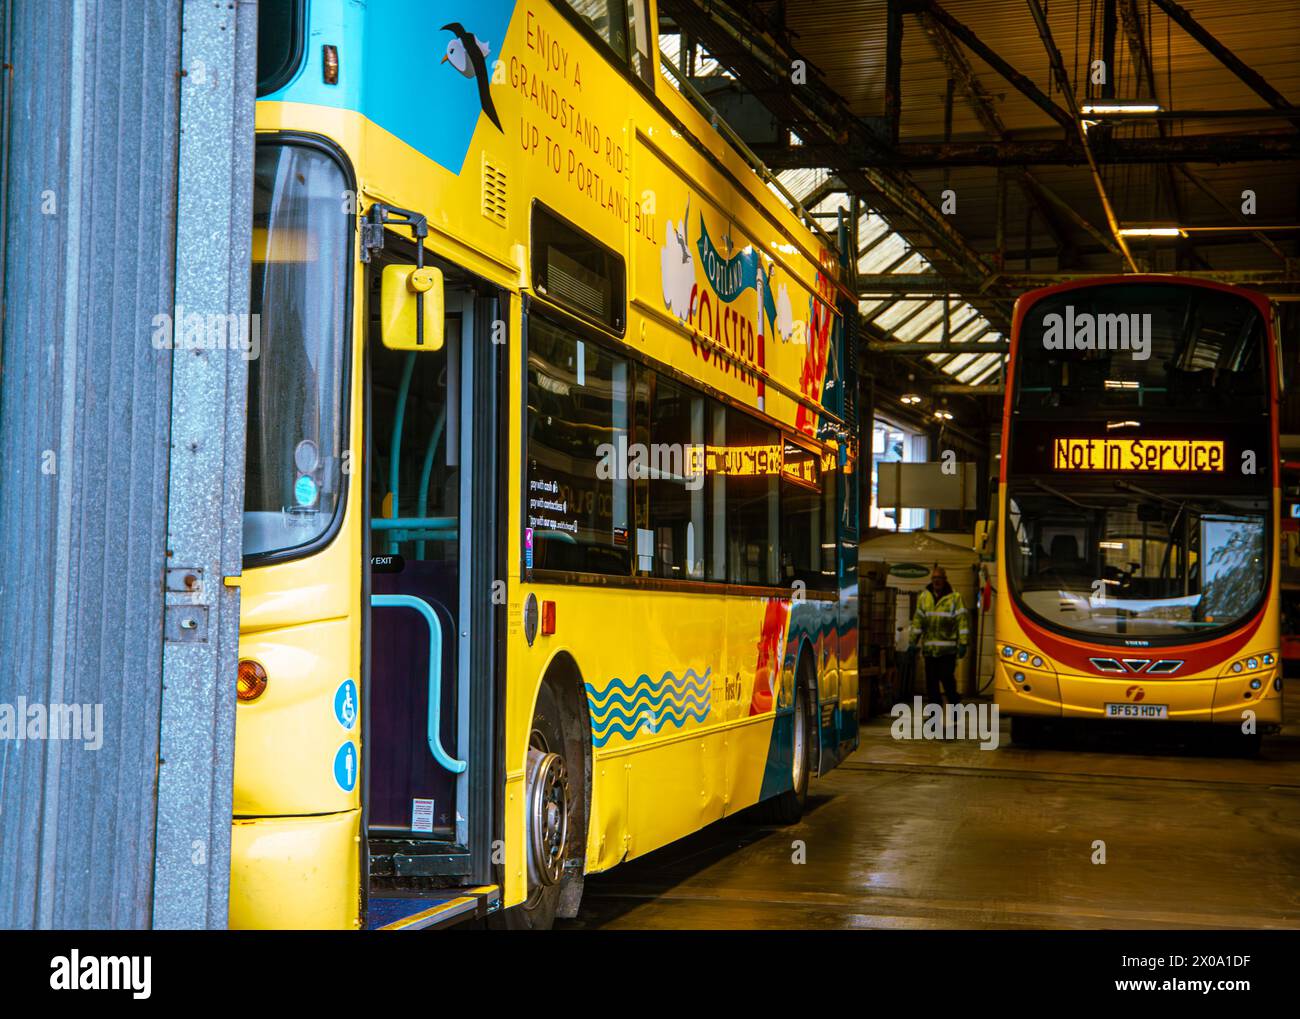 Buses in the depot Weymouth Dorset UK Stock Photo